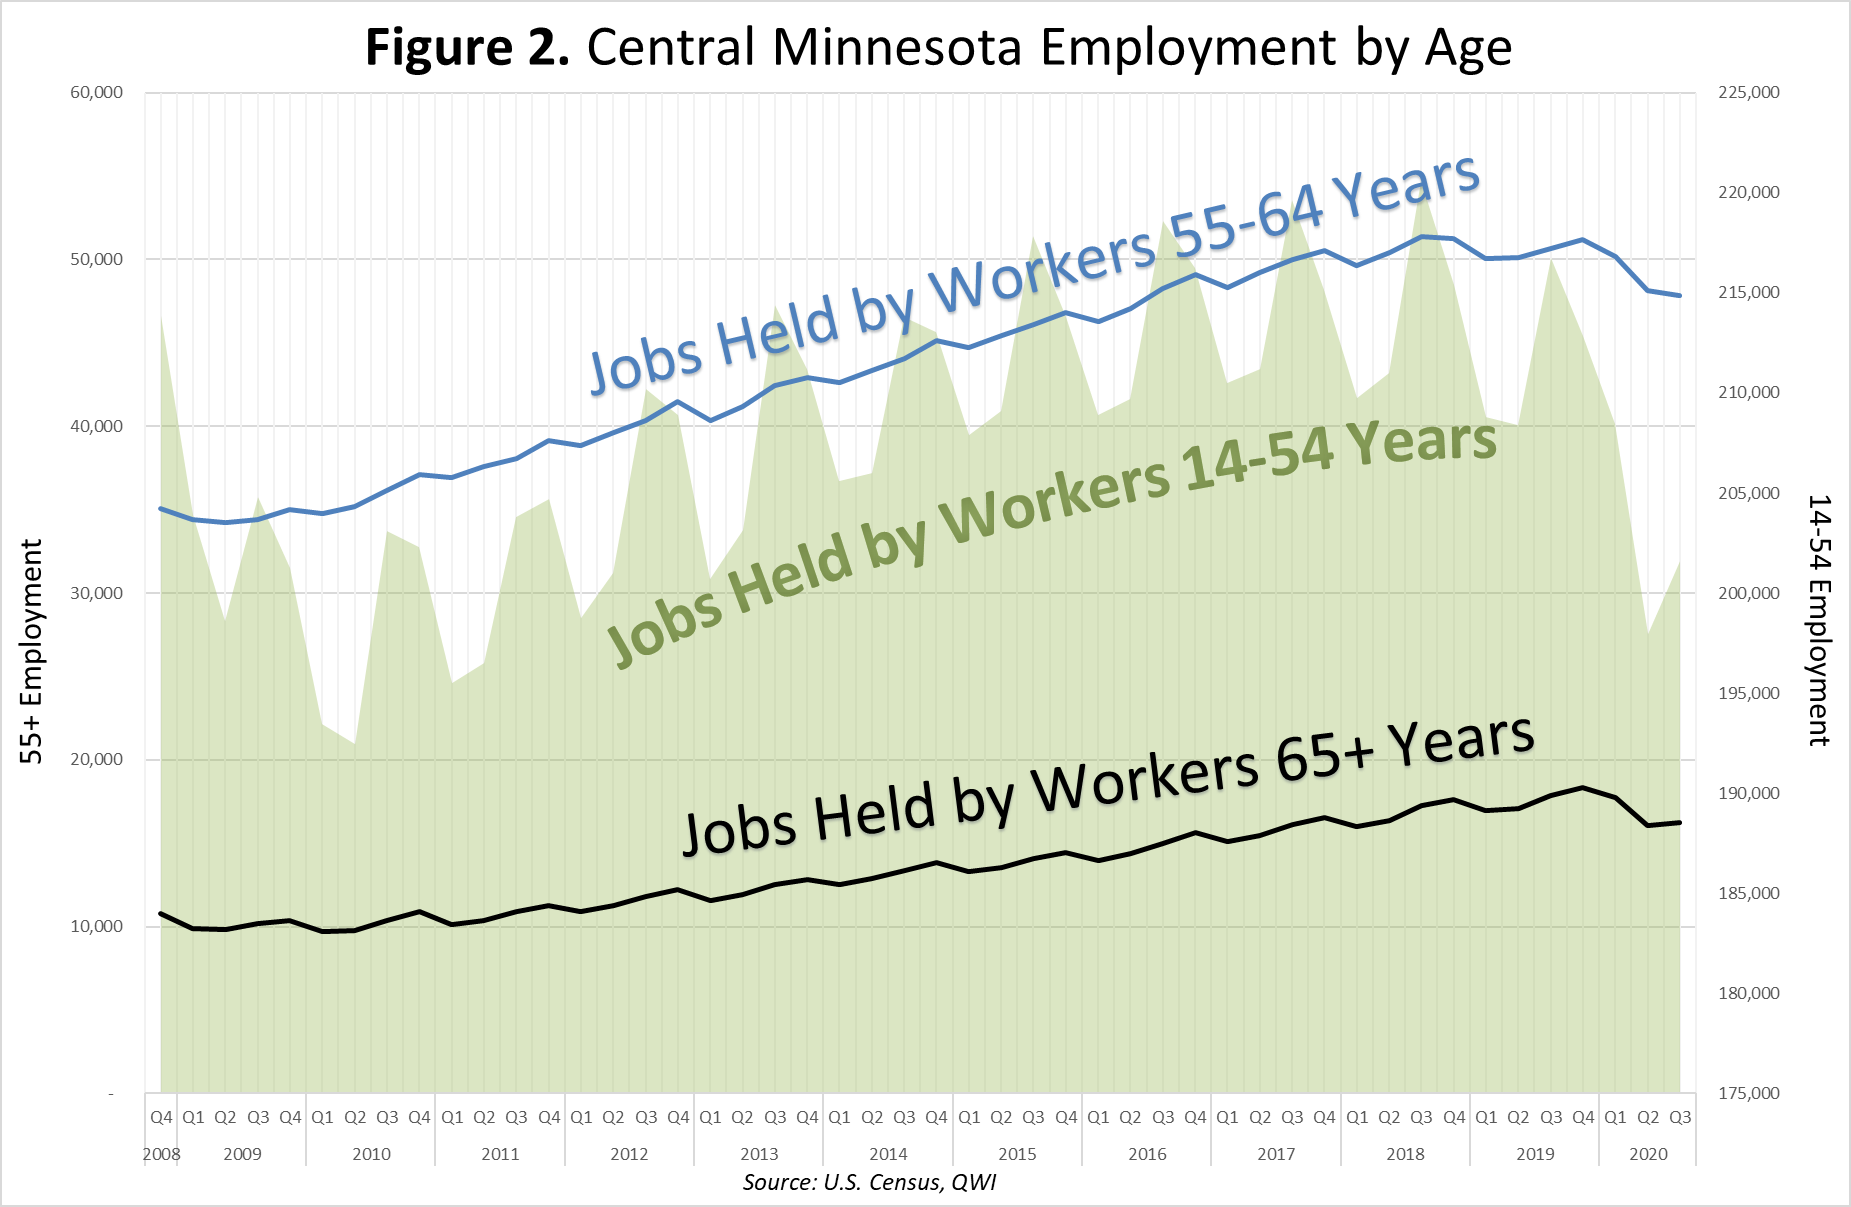 Central Minnesota Employment by Age